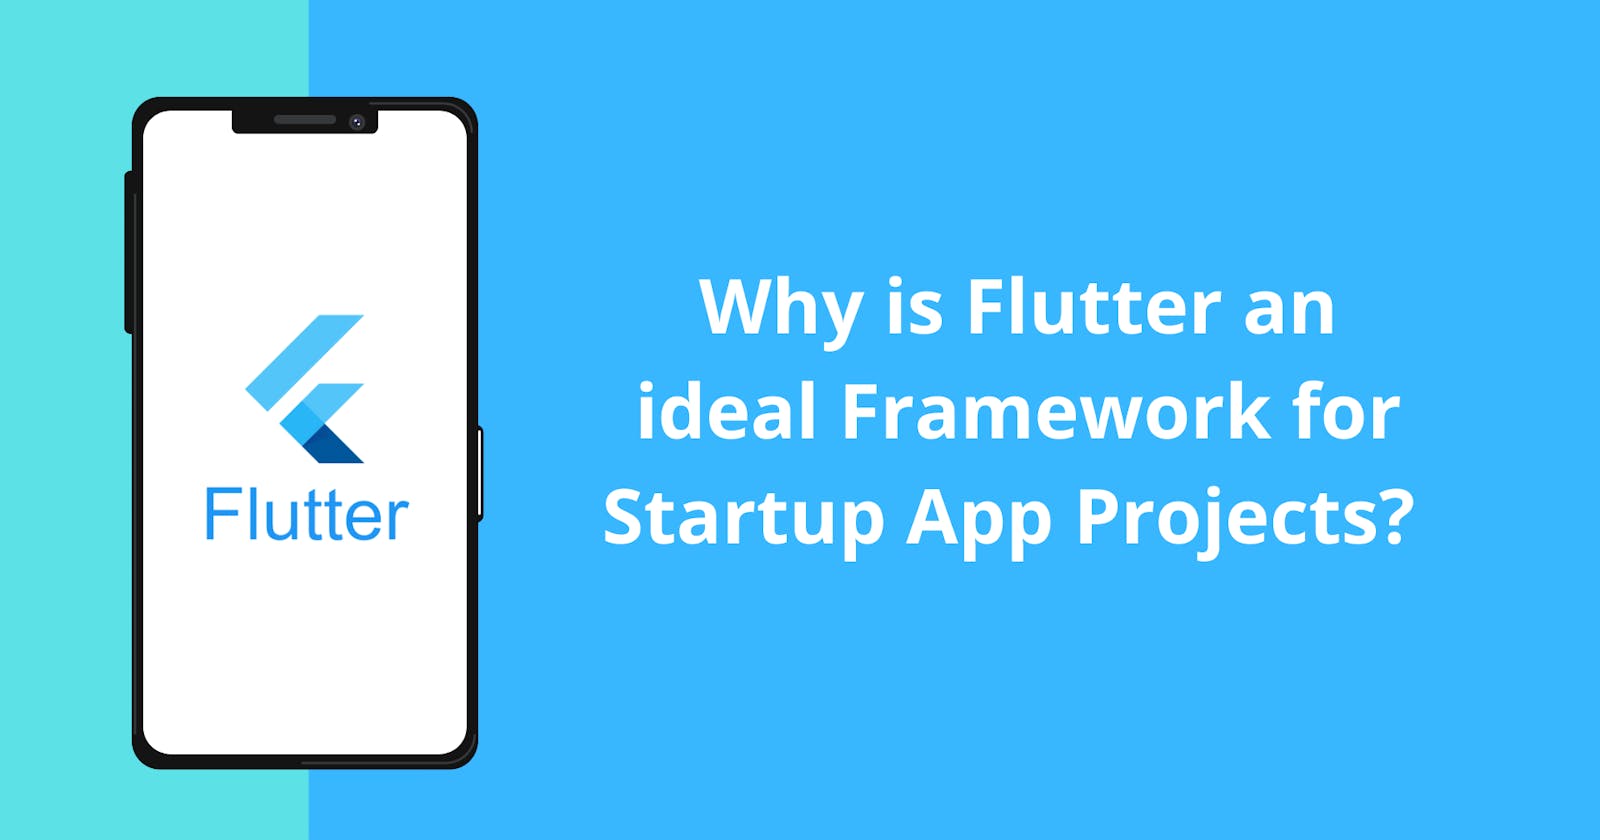 Why is Flutter an ideal Framework for Startup App Projects?